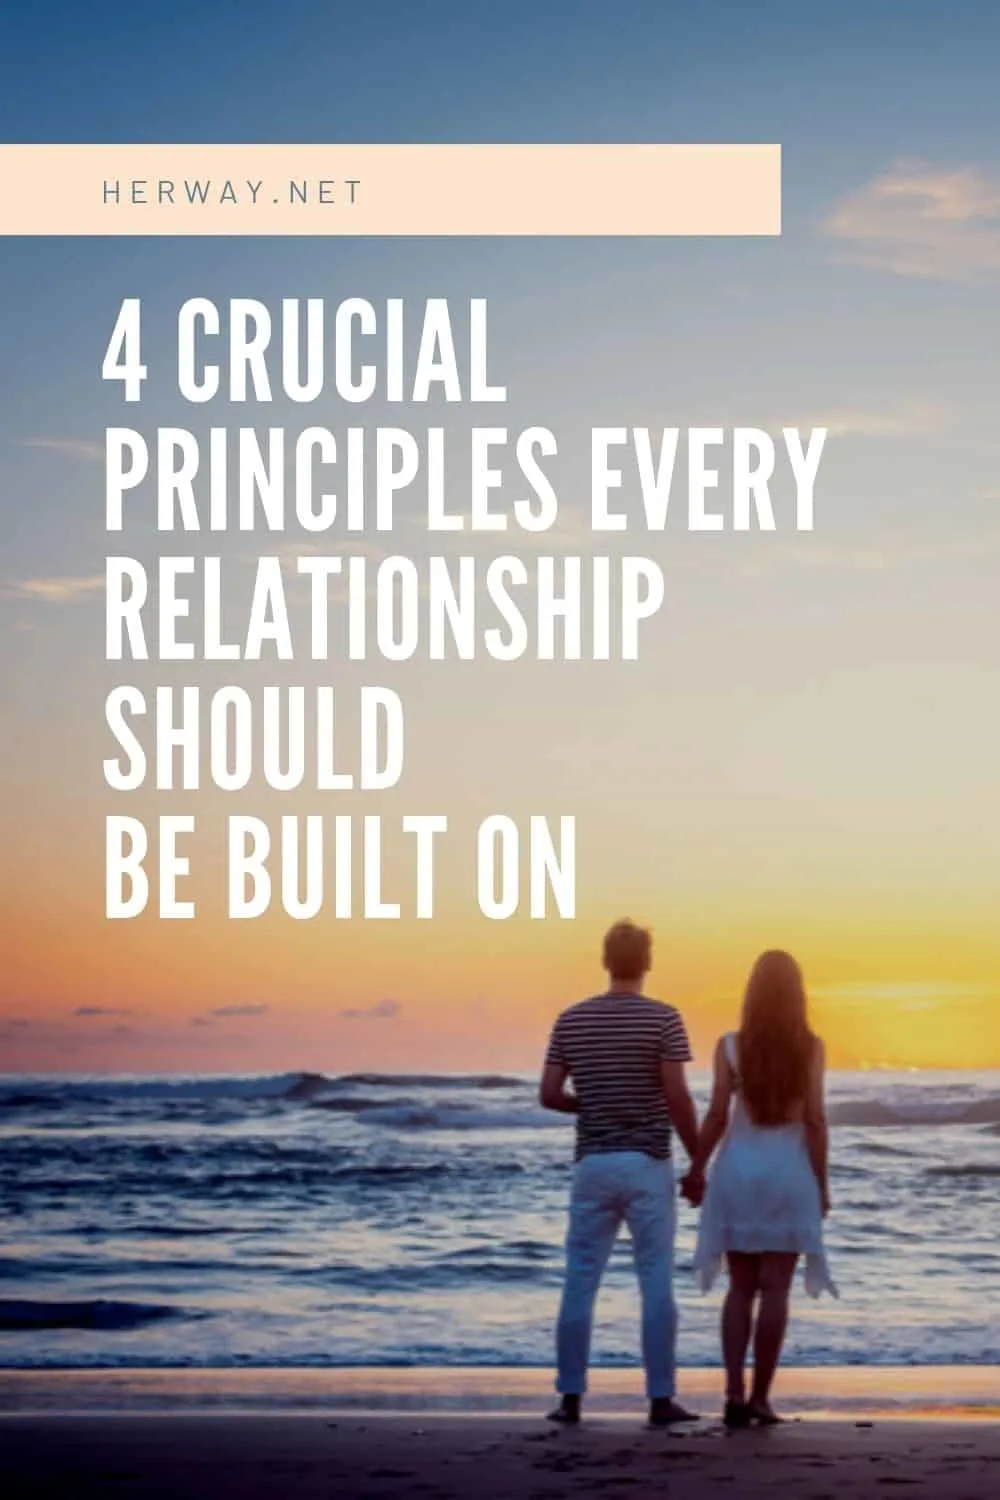 4 Crucial Principles Every Relationship Should Be Built On